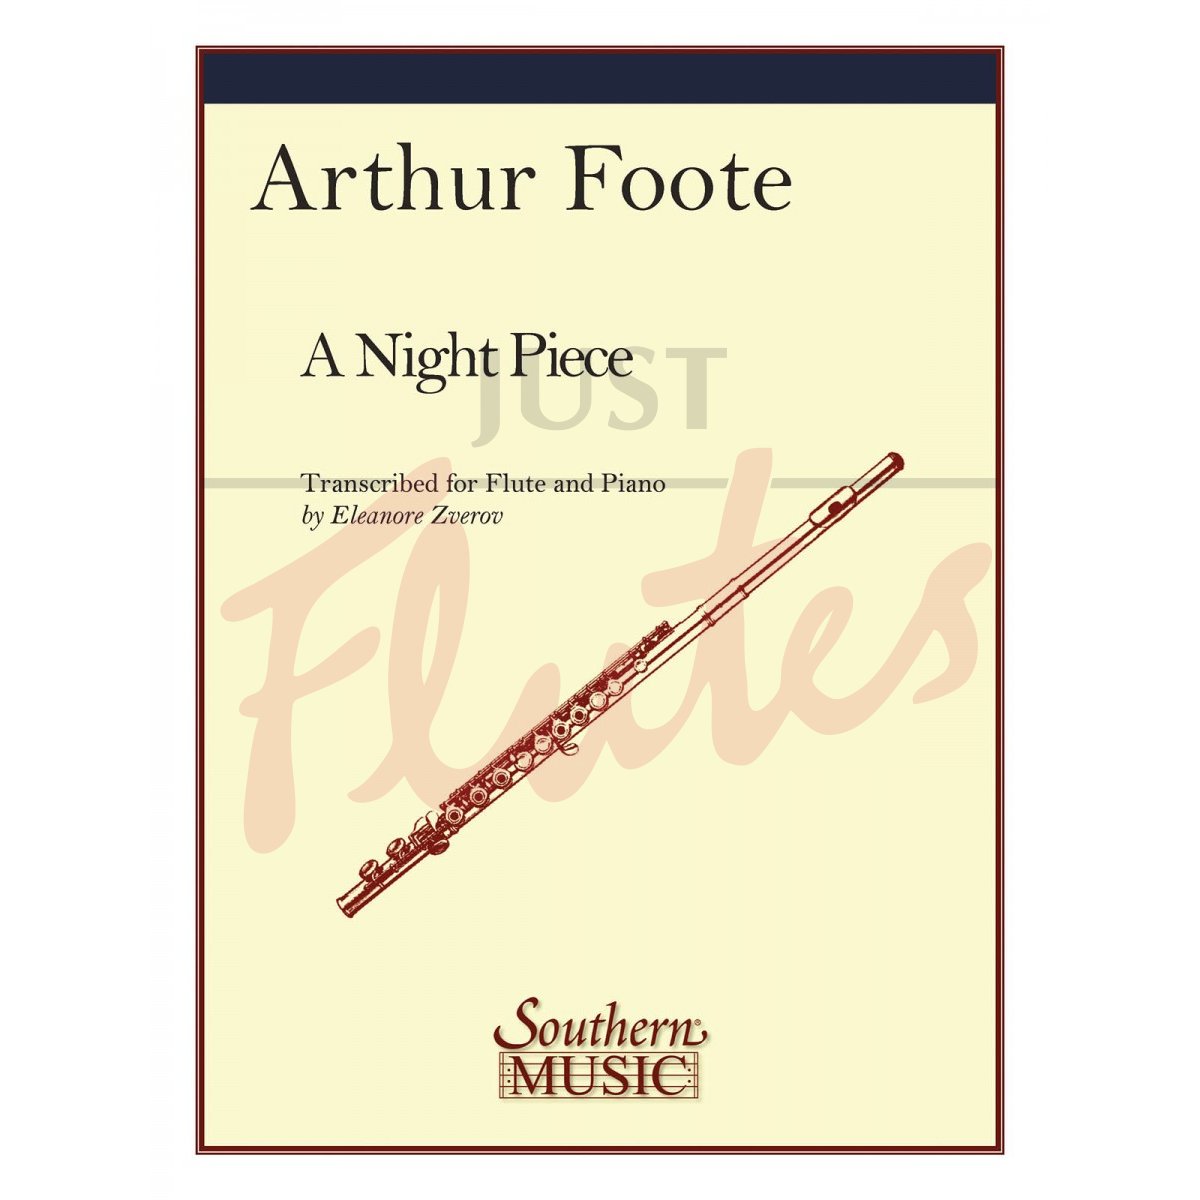 A Night Piece for Flute and Piano